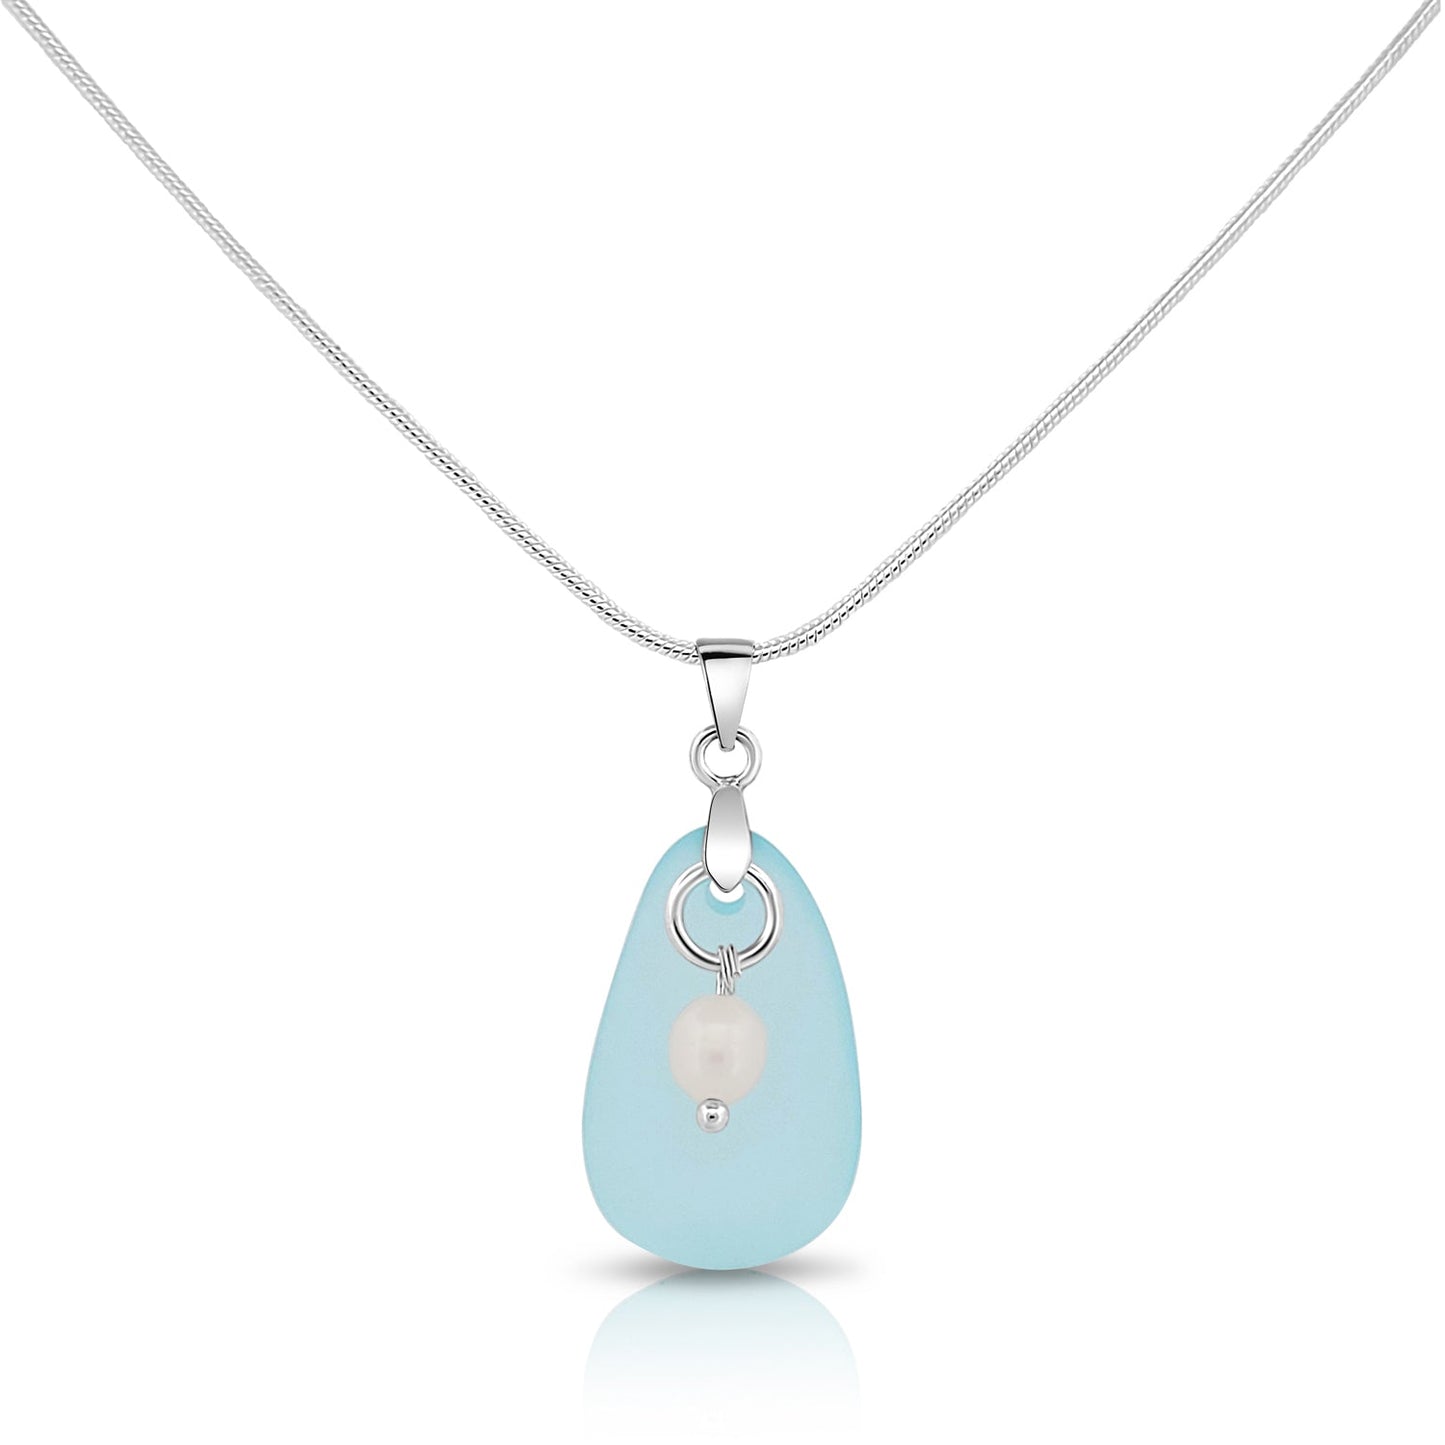 Silvertone, Clear, Blue, Seaglass and Freshwater Pearl Necklace